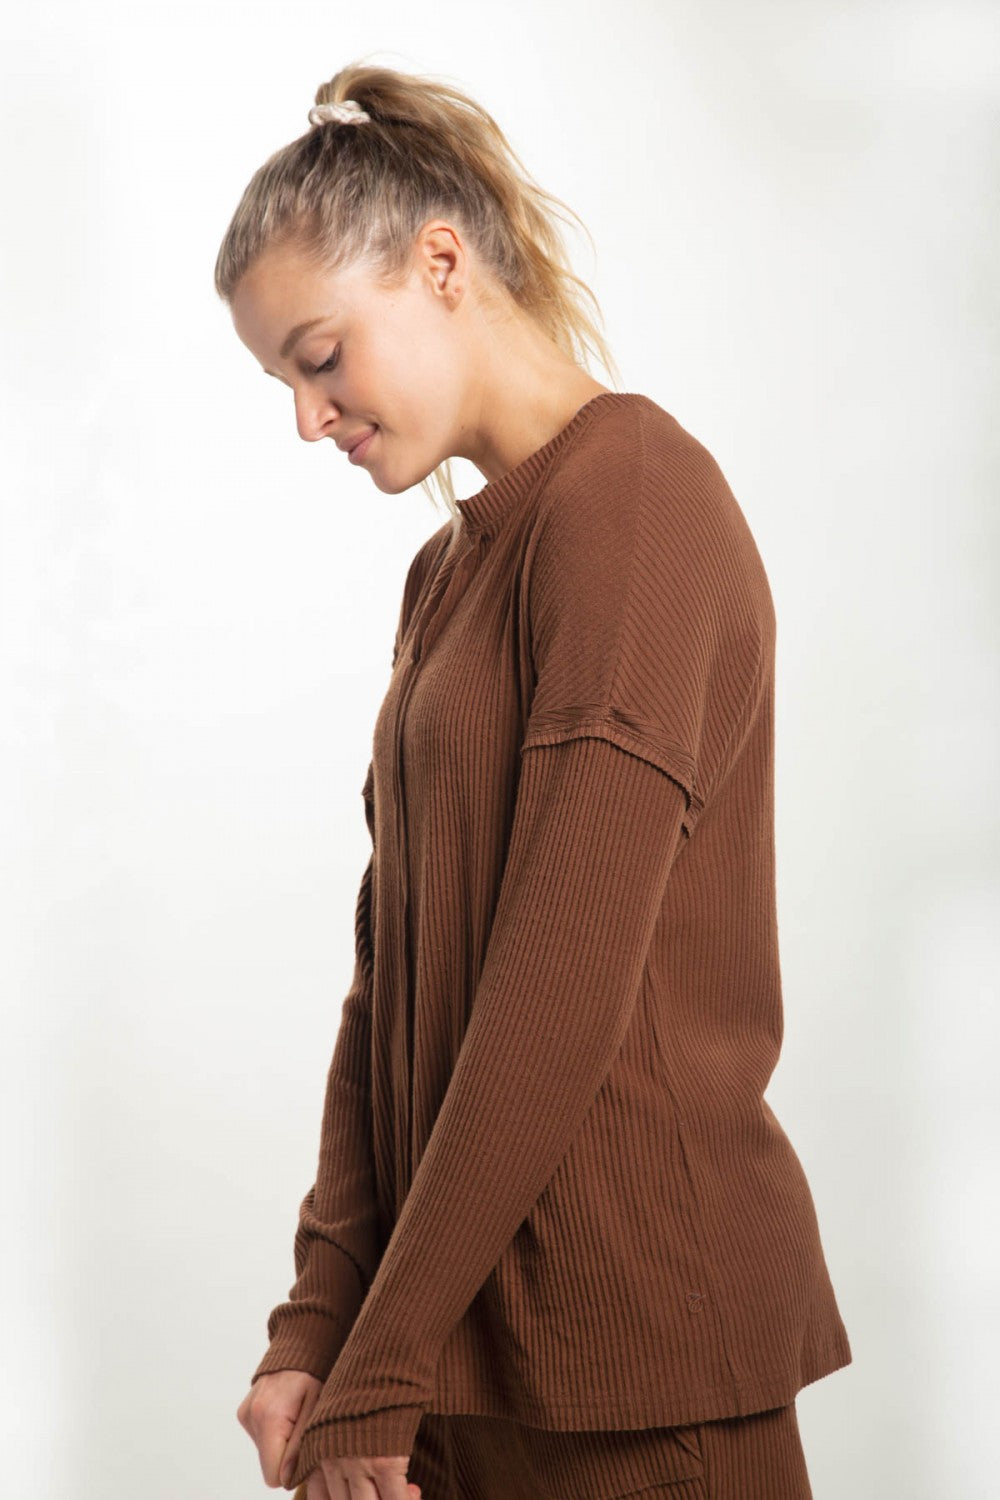 Mono B Ribbed Pullover with Notched Neckline, Chill Lounge Pants, or Chill Lounge Shorts Separates